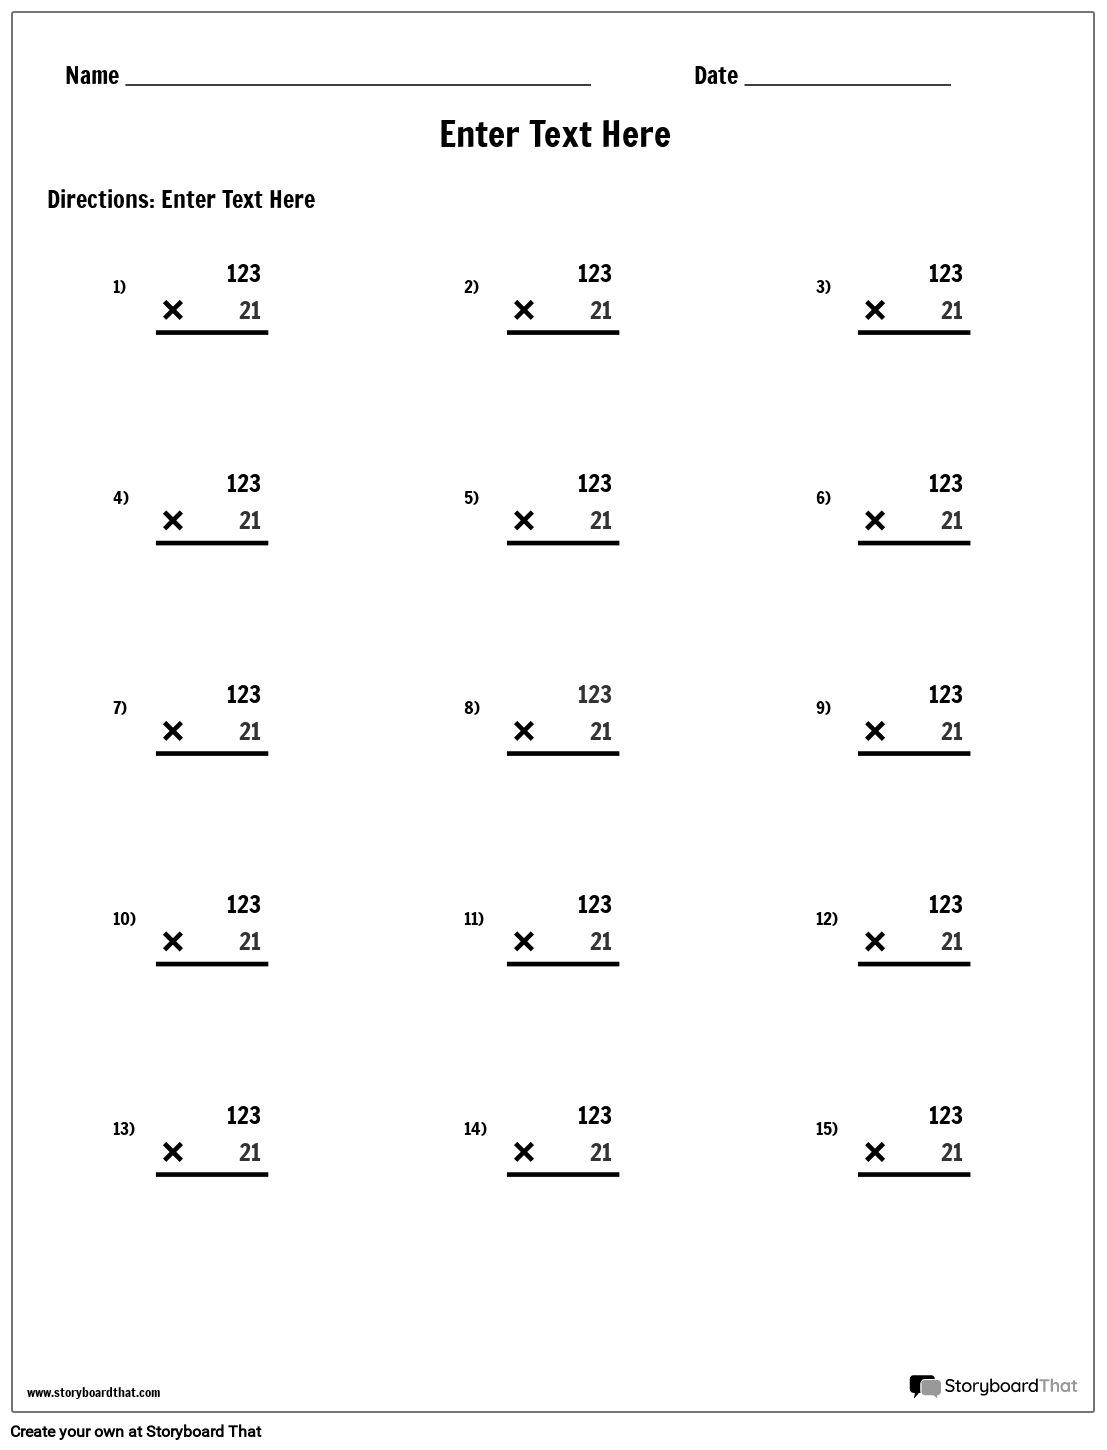 use-place-value-to-multiply-worksheet-multiplication-using-place-value-part-1-math-showme